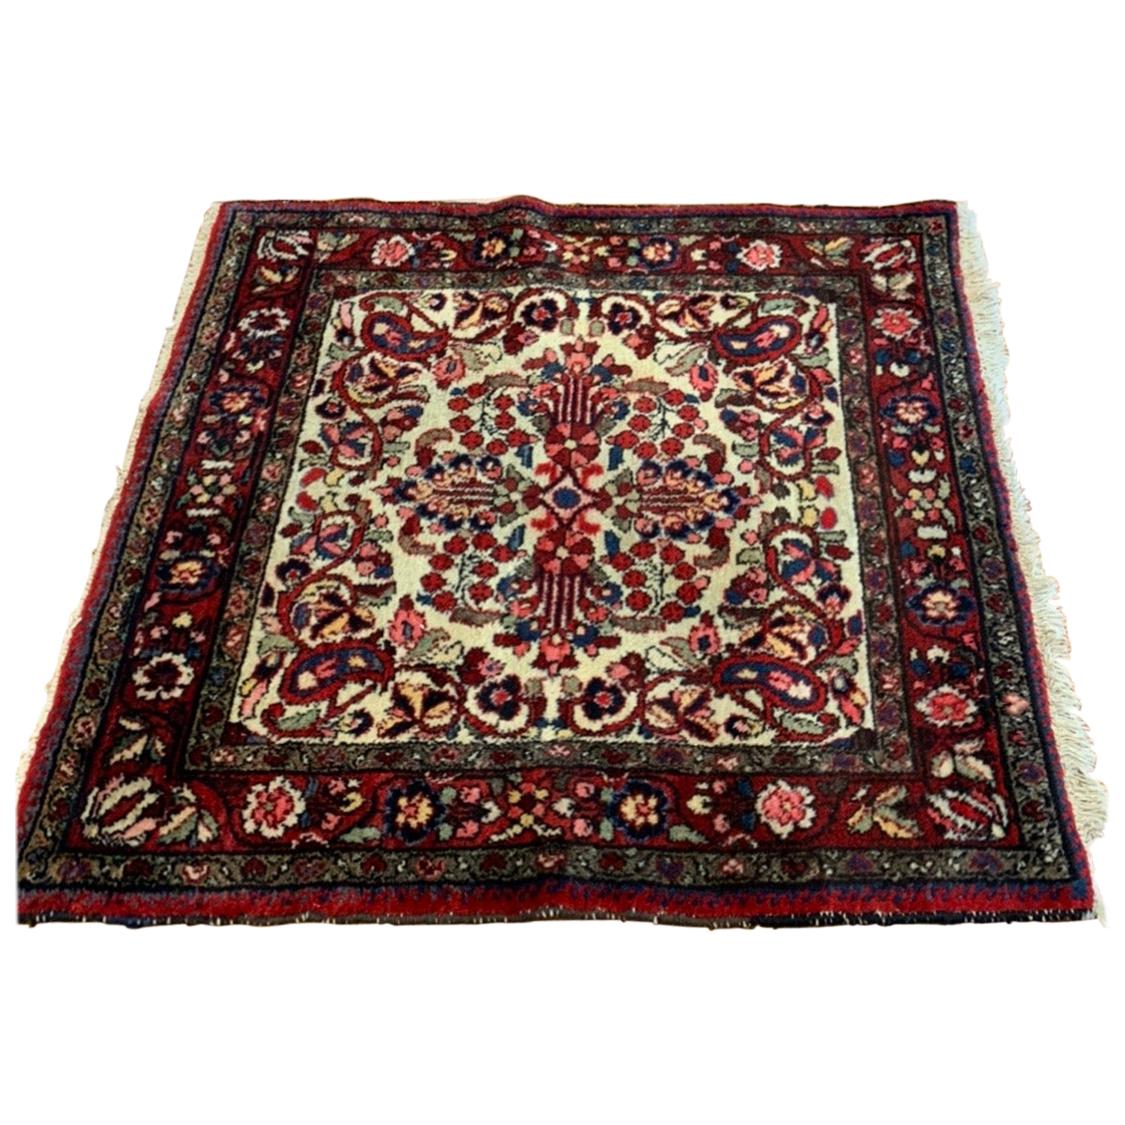 Antique Red Ivory Navy Blue Square Persian Hamedan Small Area Rug